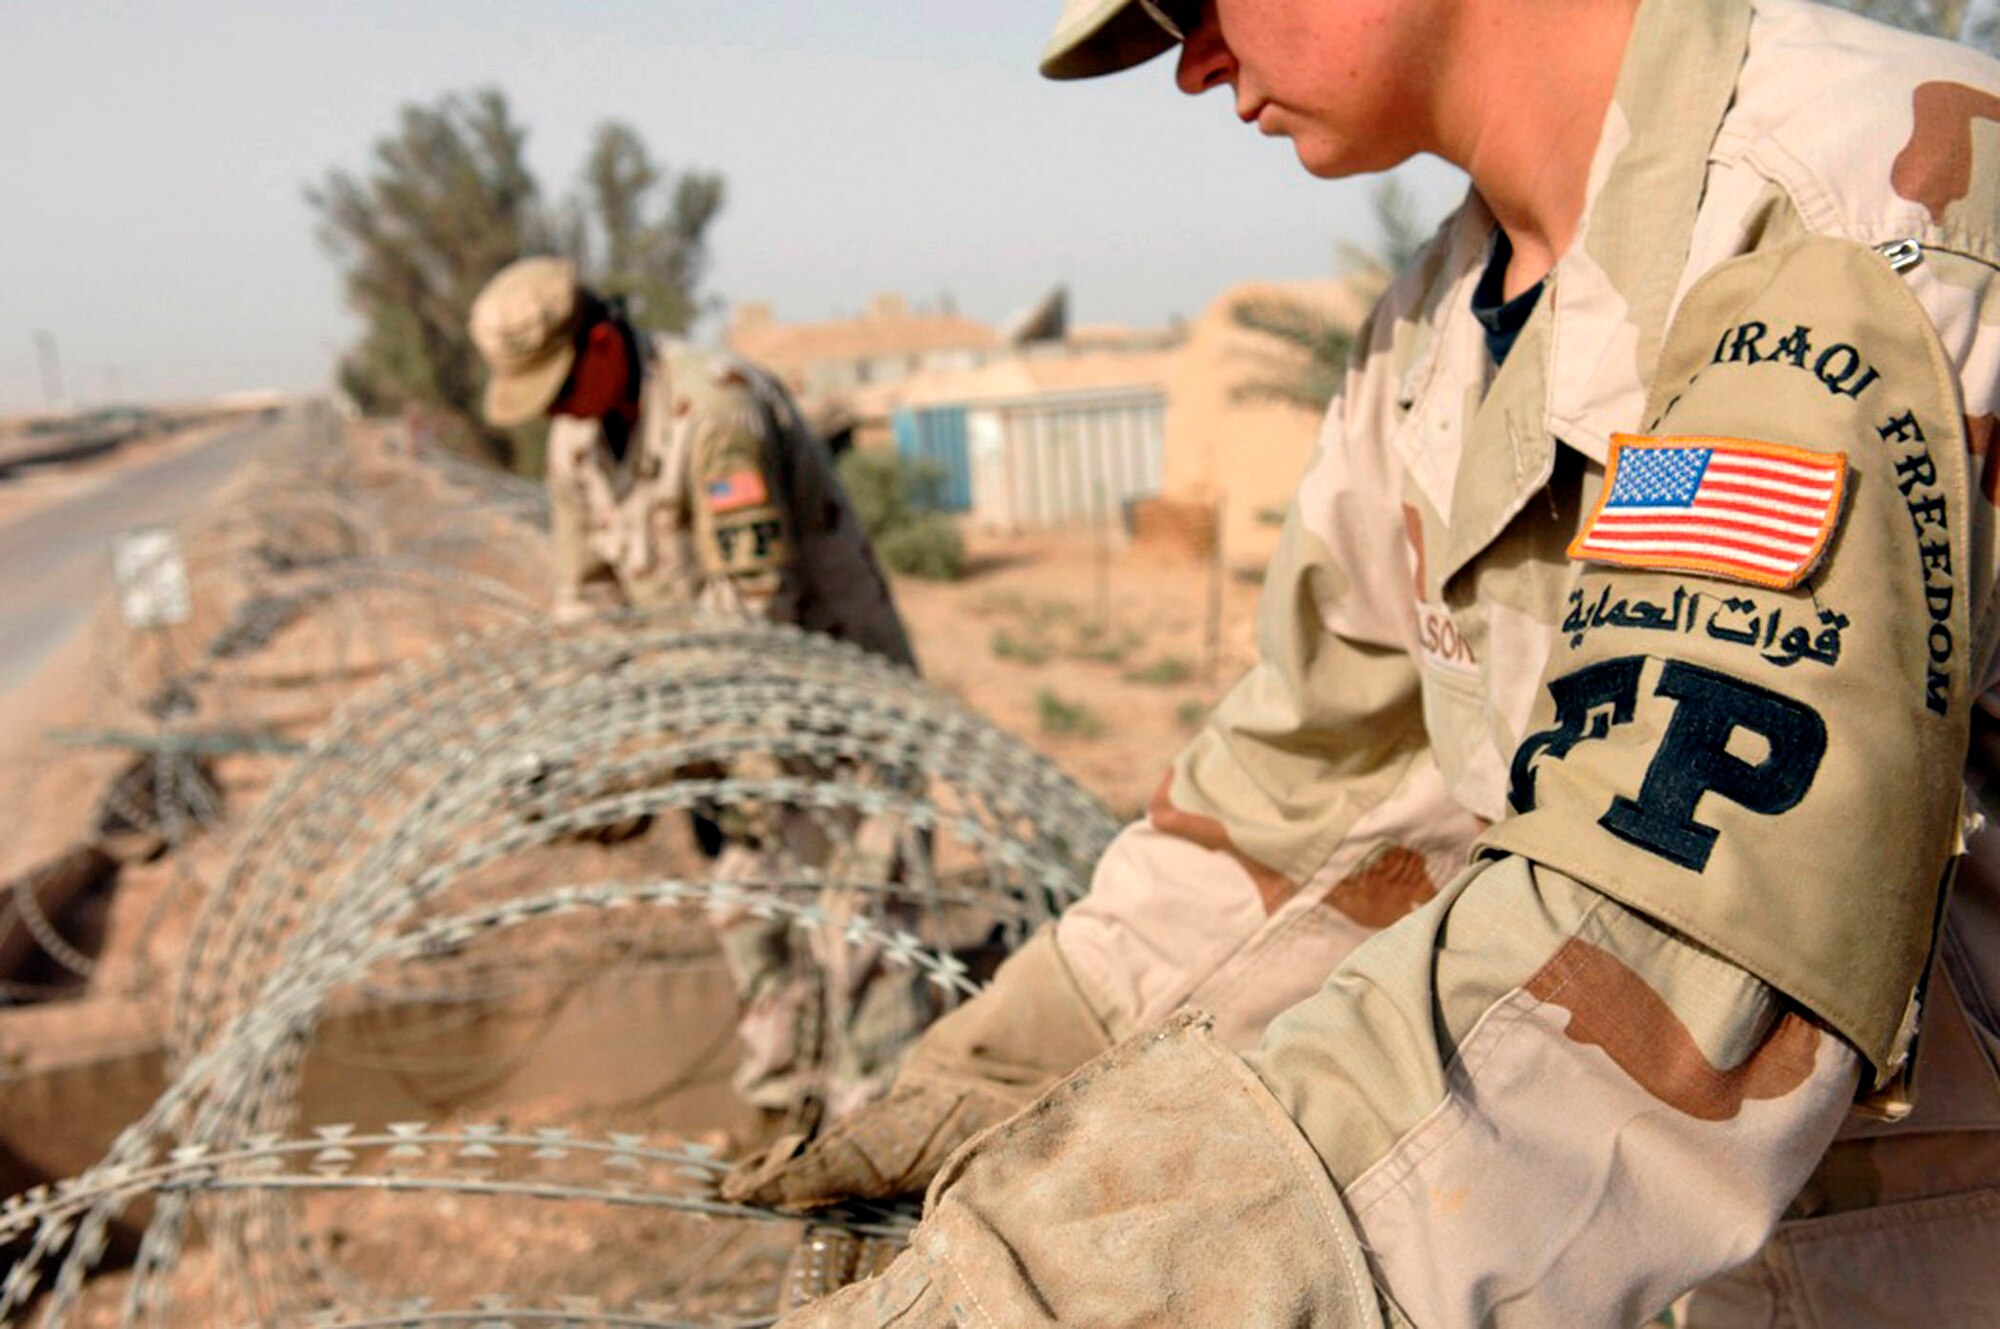 Tech. Sgt. Hunter Lescoe (left) and Senior Airman Margaret Wilson unwind concertina wire they are installing on a wall to protect the 407th Expeditionary Communication Squadron compound on Ali Air Base, Iraq. Both are members of the 407th Expeditionary Security Forces Squadron.  (U.S. Air Force photo/Master Sgt. Robert W. Valenca)